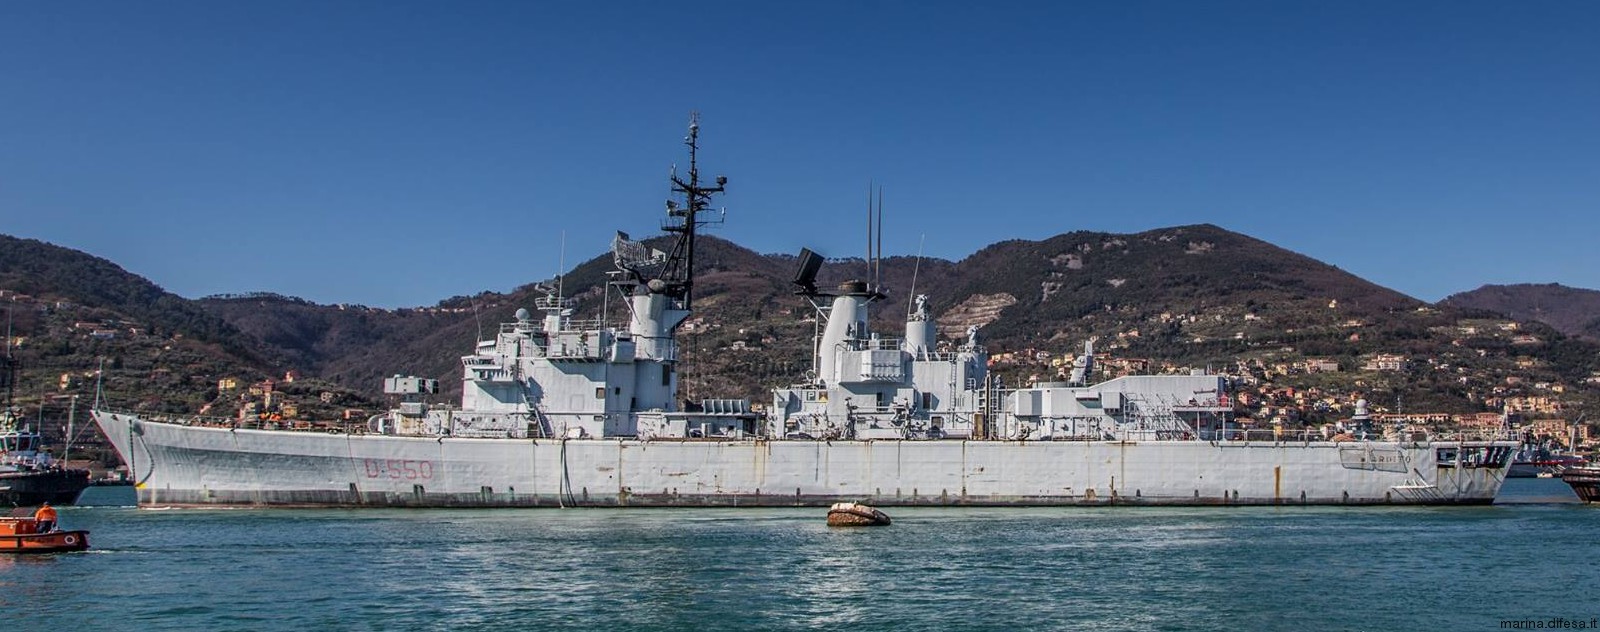 d-550 ardito its nave audace class guided missile destroyer ddg italian navy marina militare aliaga turkey 06